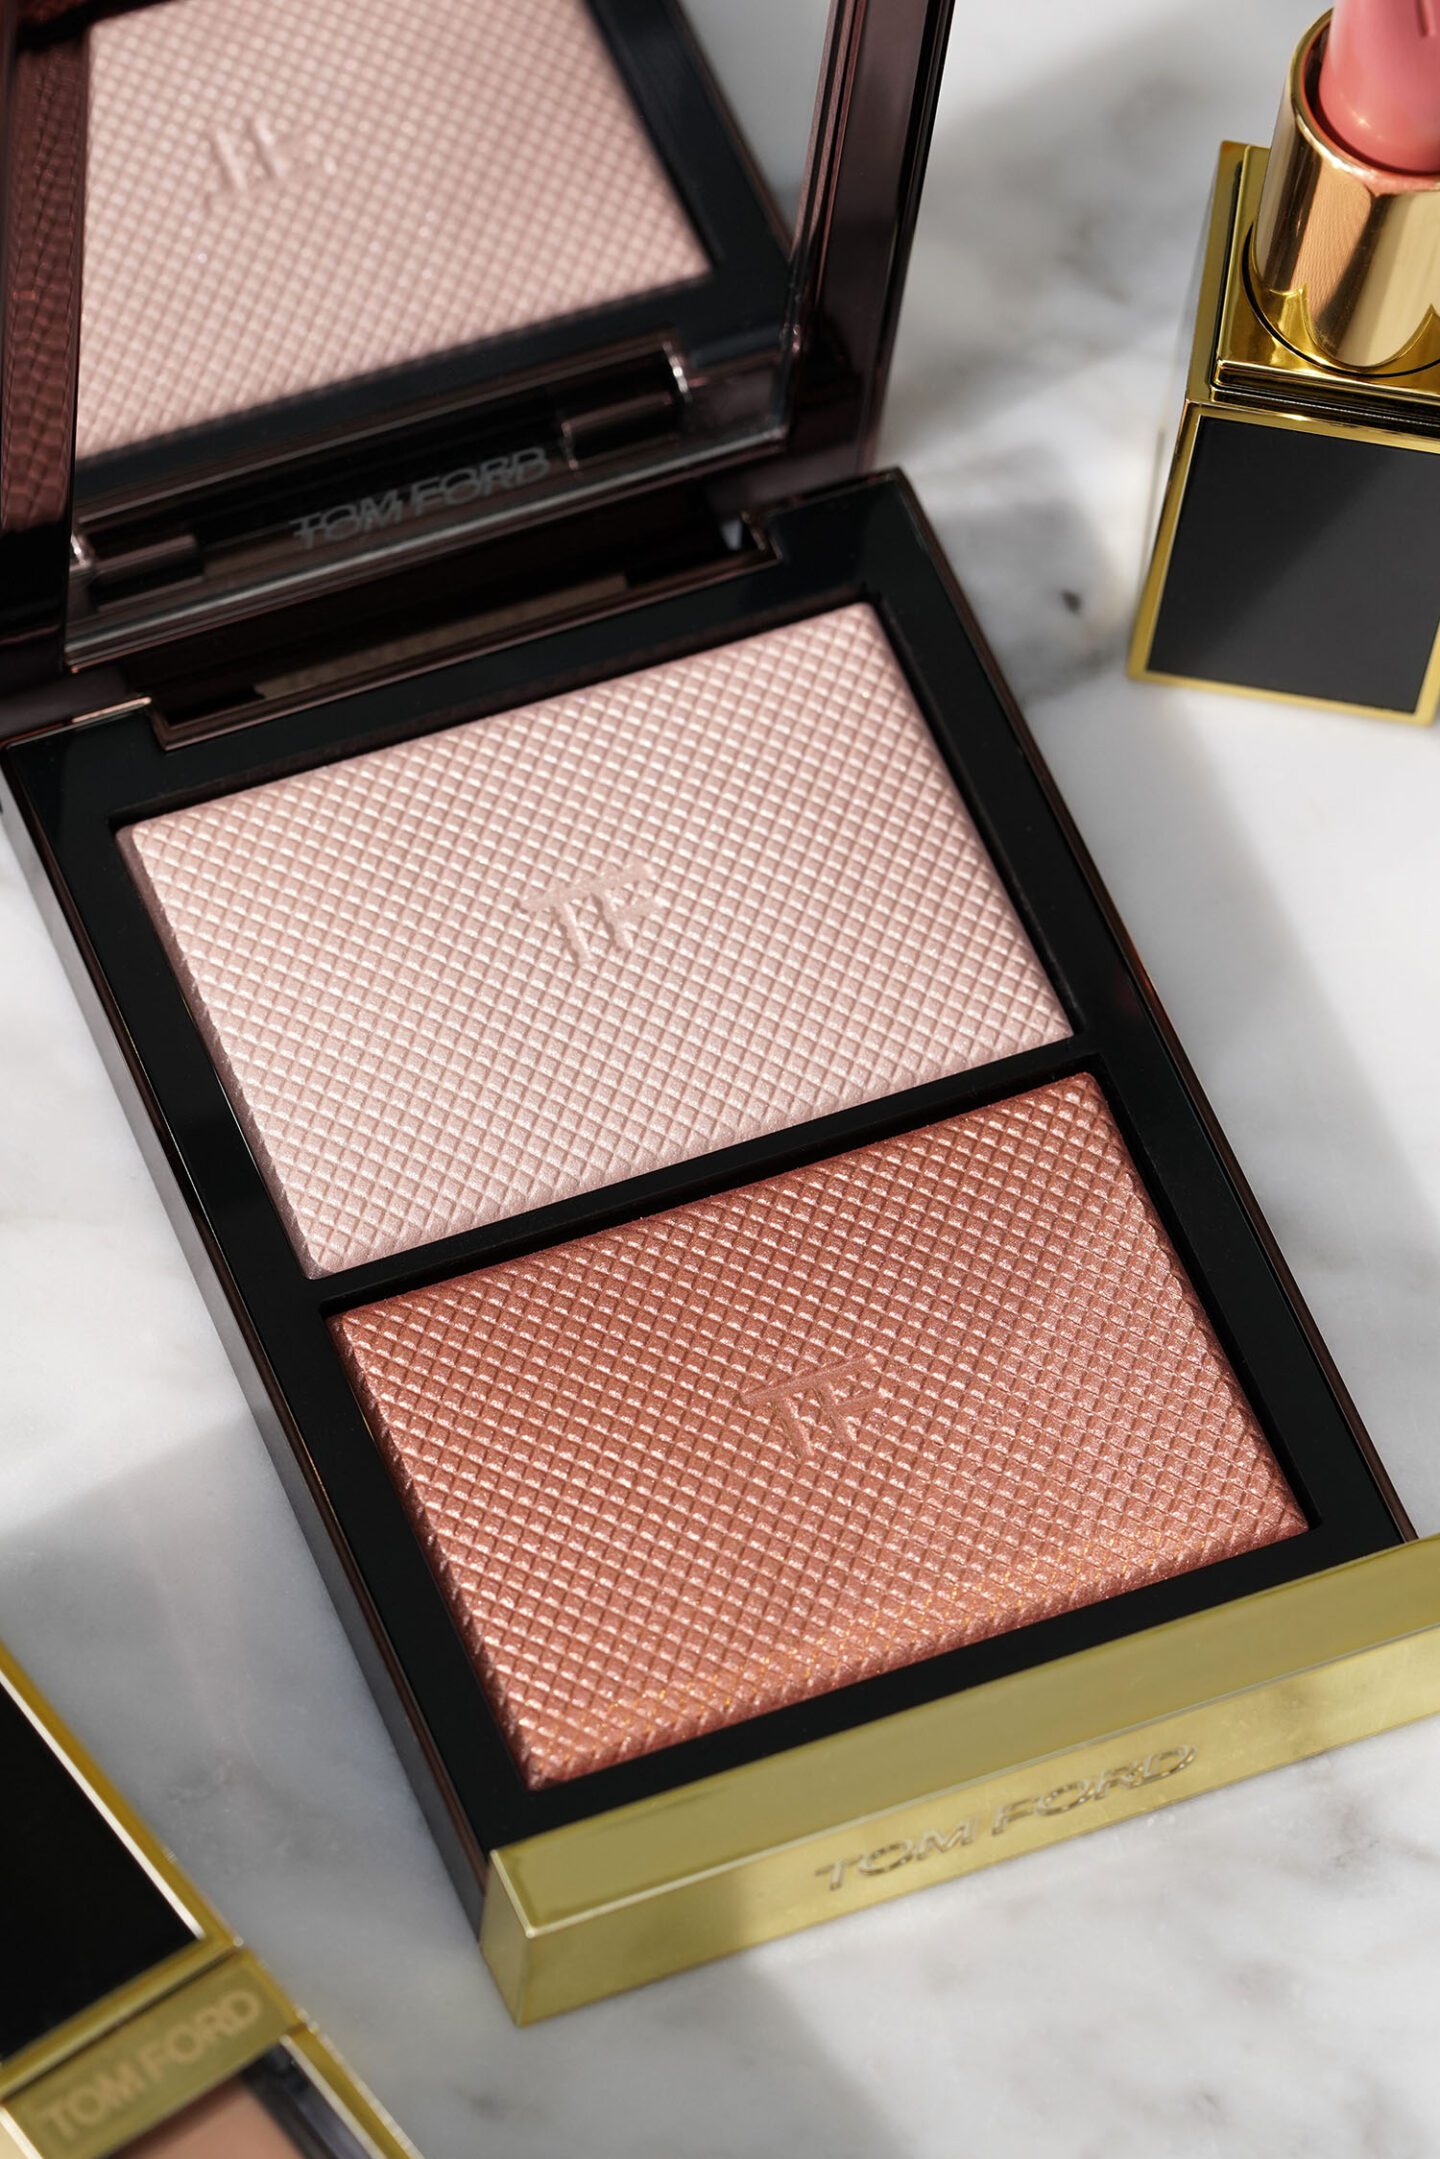 Tom Ford Shade and Illuminate Highlighting Duo in Peachlight